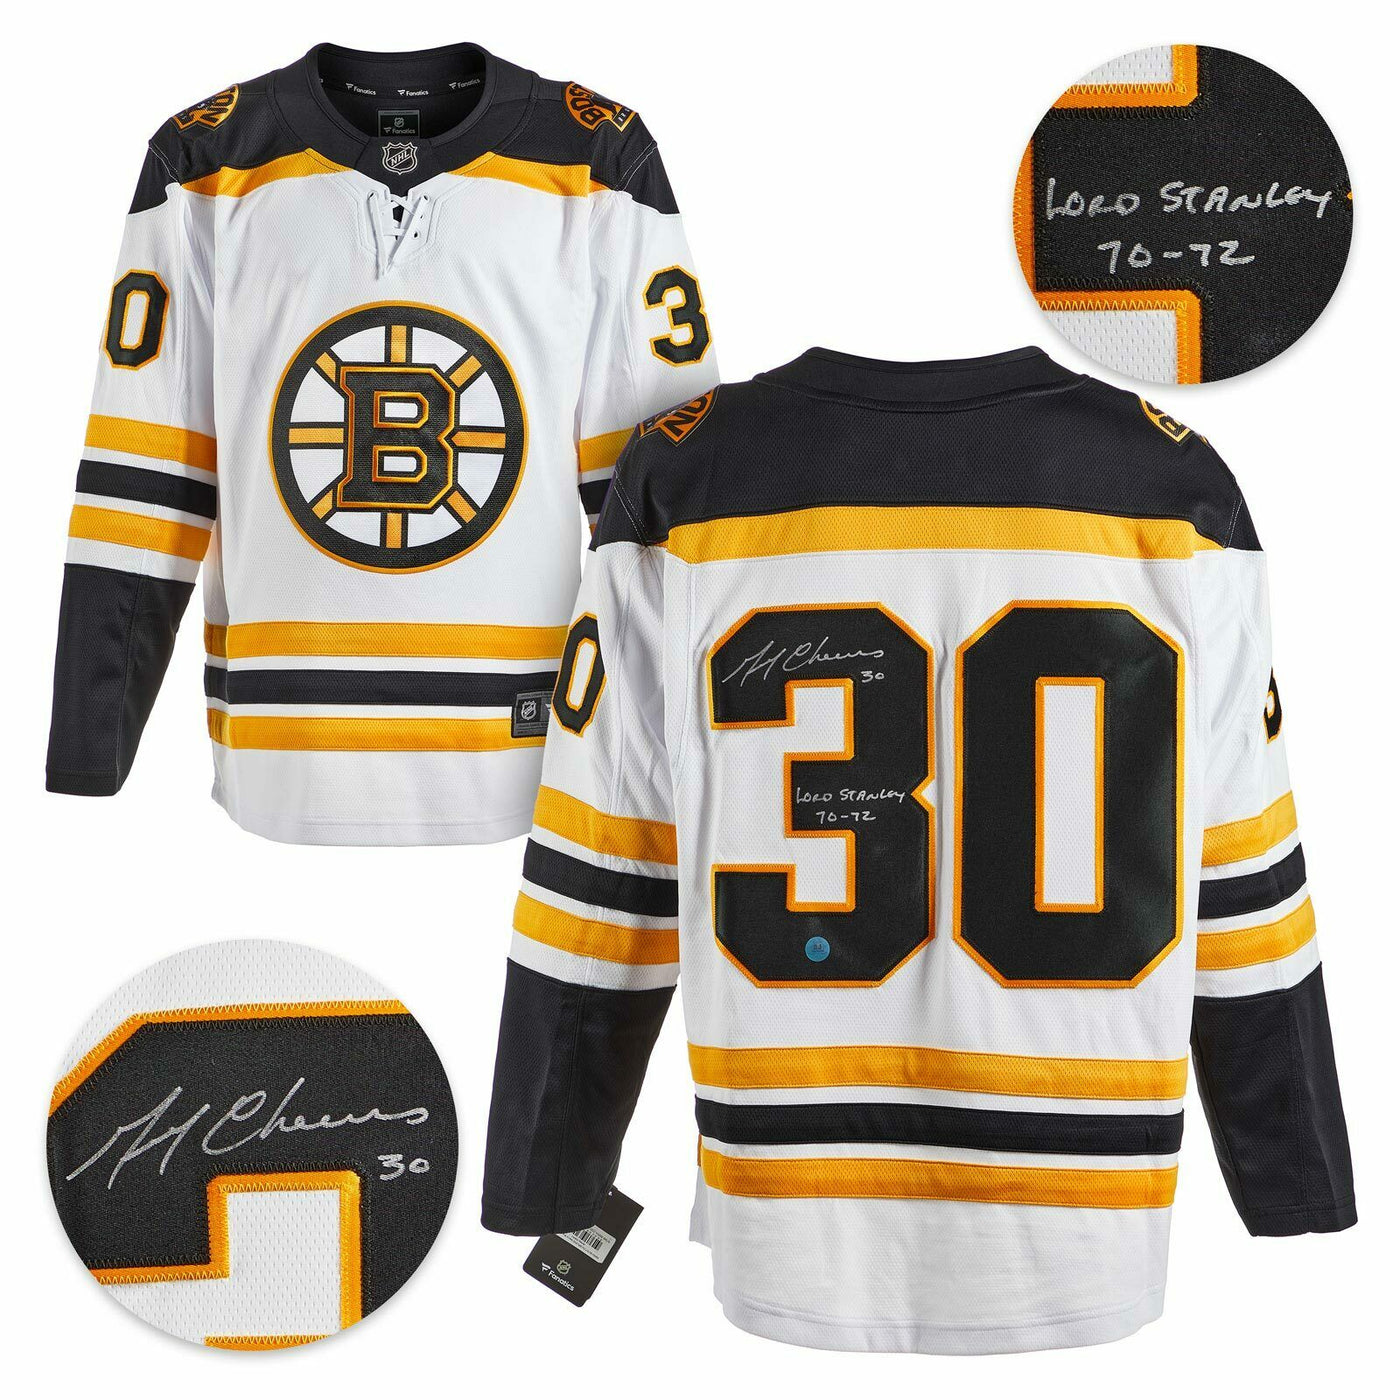 Gerry Cheevers Boston Bruins Autographed White Fanatics Jersey